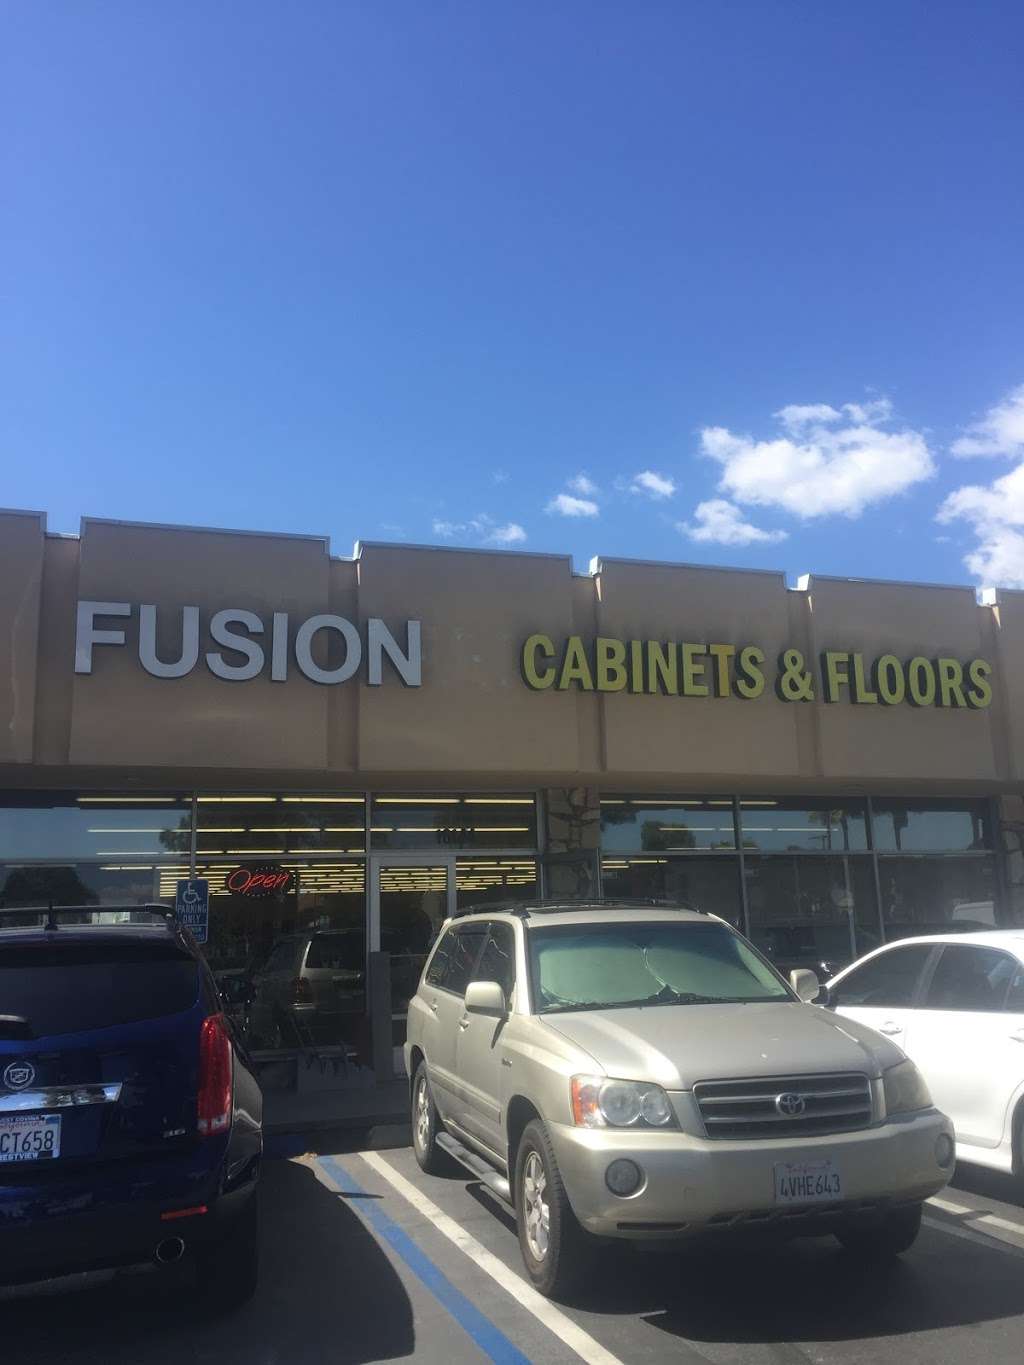 Fusion Cabinets & Flooring | 10144 Central Ave, Montclair, CA 91763 | Phone: (909) 445-1733